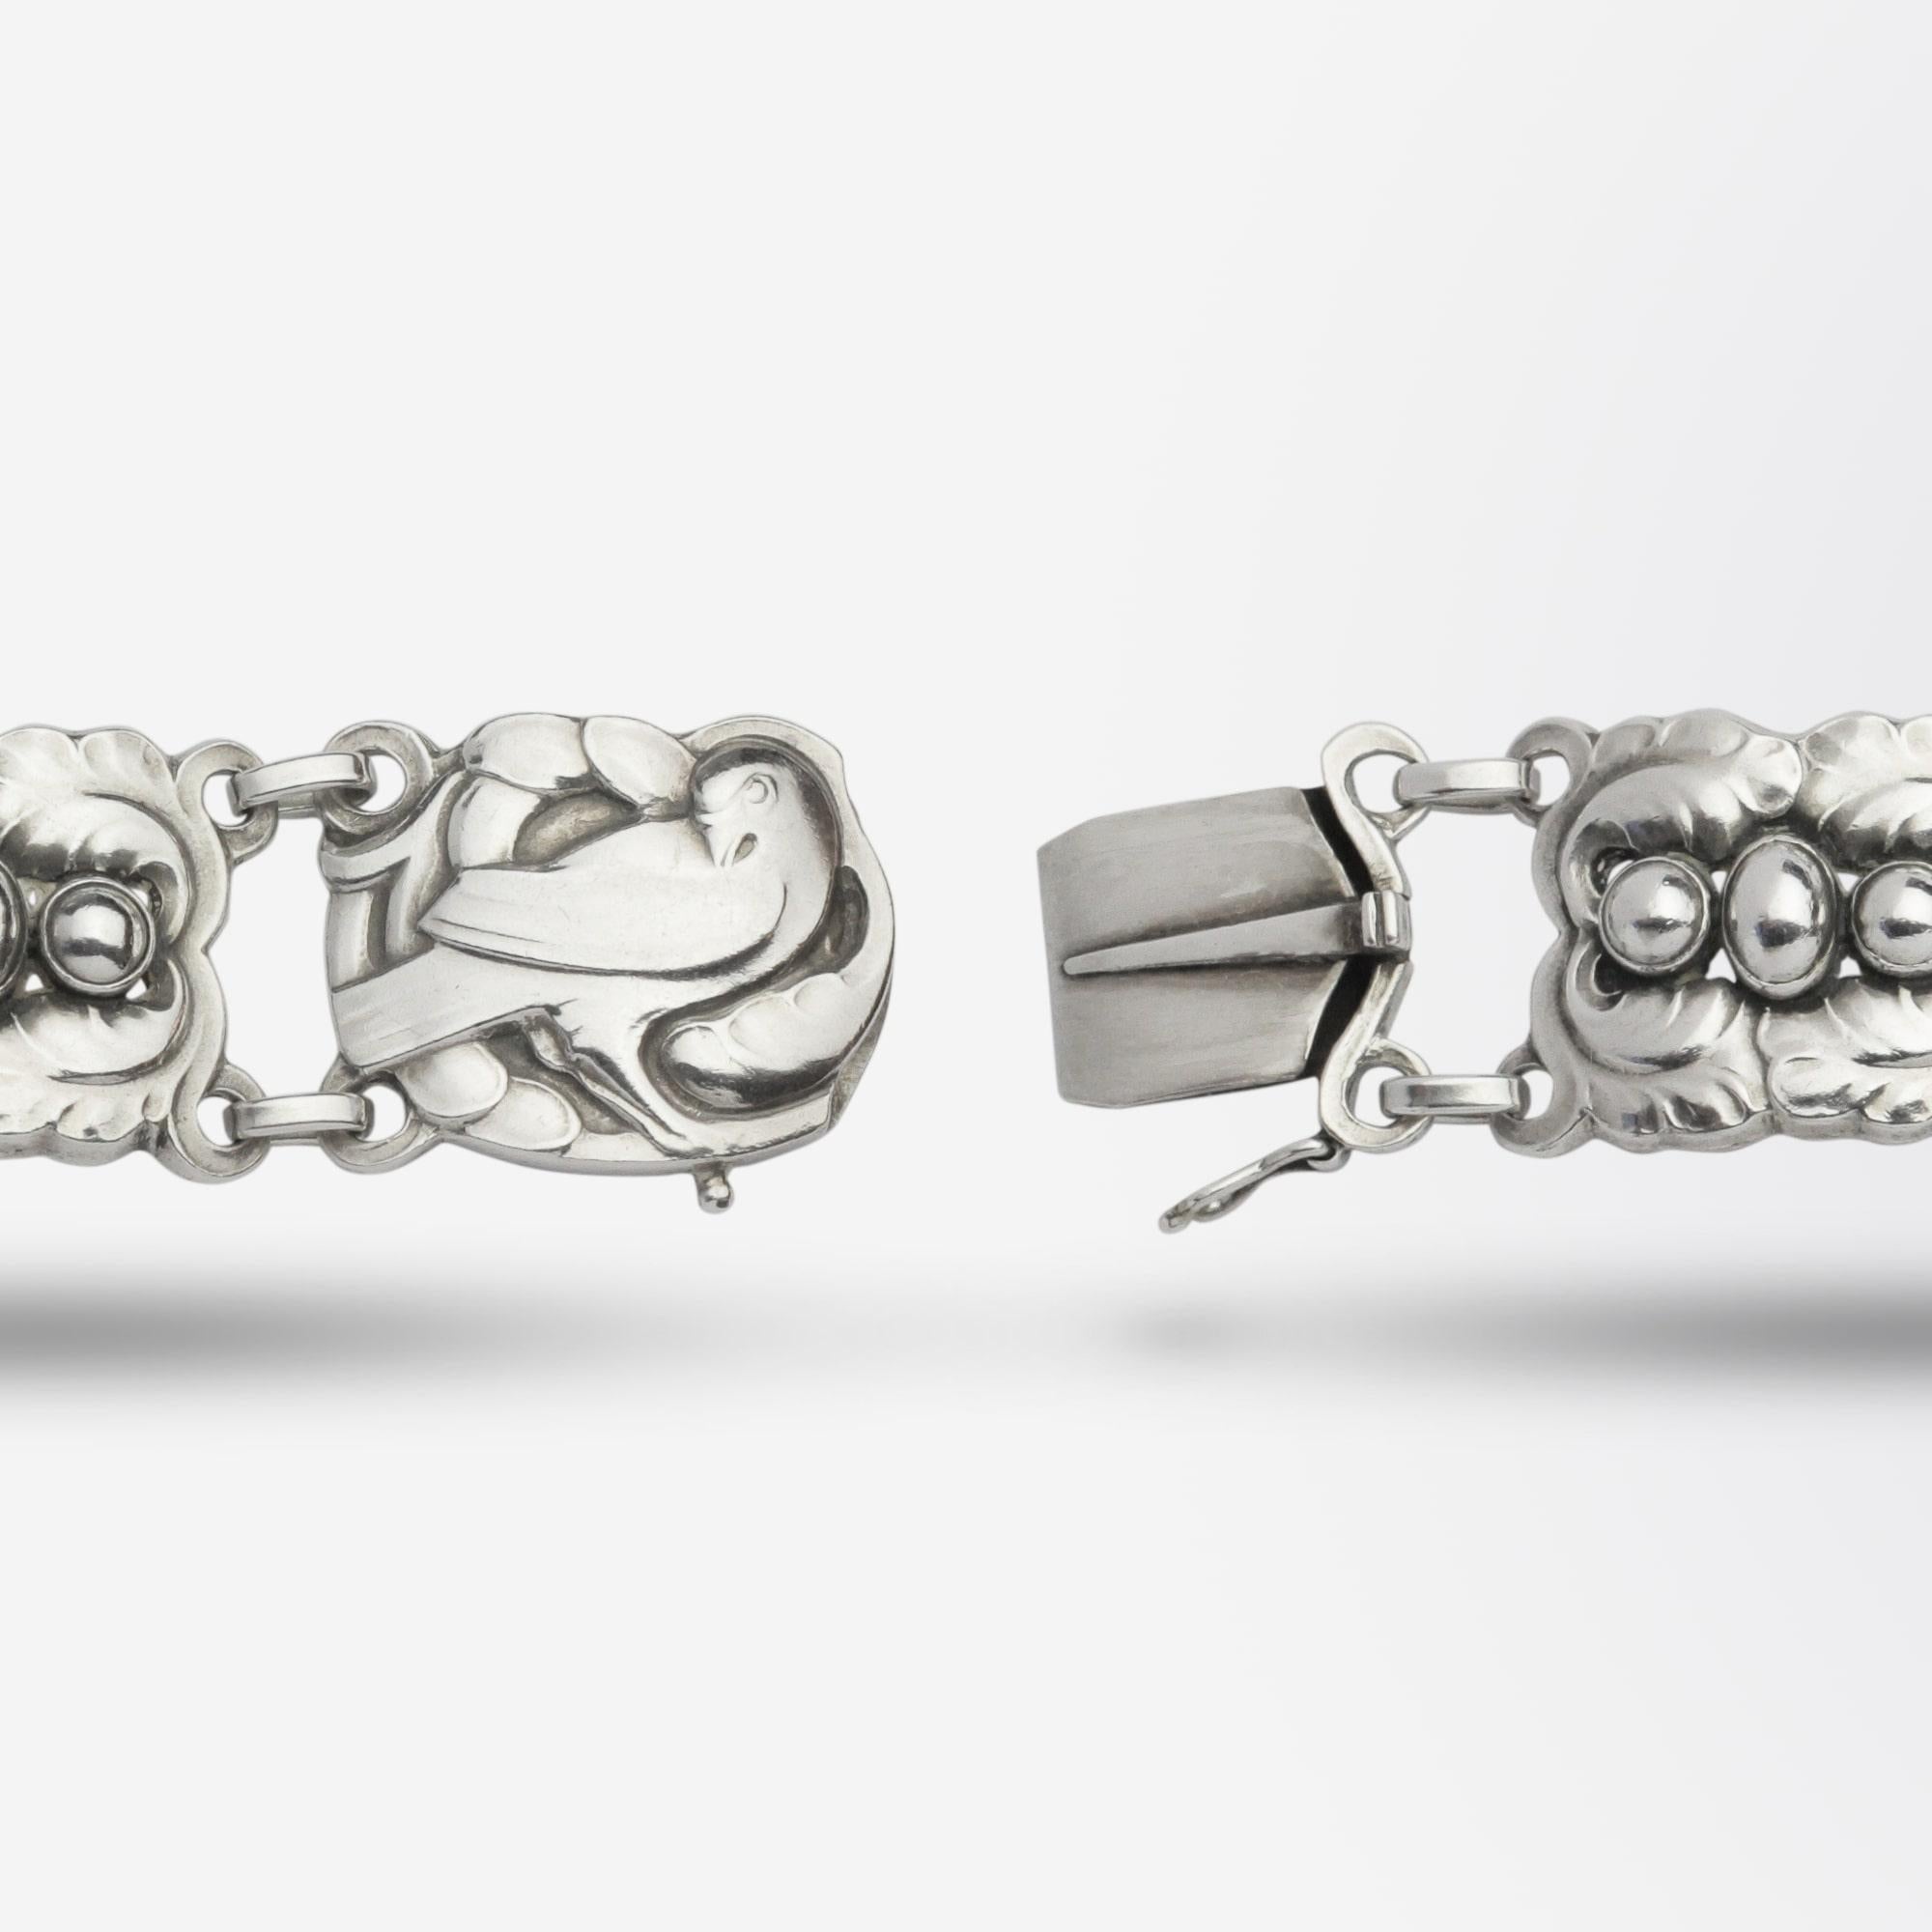 An early sterling silver bracelet in pattern '#14' by Kristian Mohl-Hansen for Danish jeweller Georg Jensen. The beautifully made sterling silver piece was handcrafted in Denmark and has a Georg Jensen hallmark for the period 1910-1925. There is a